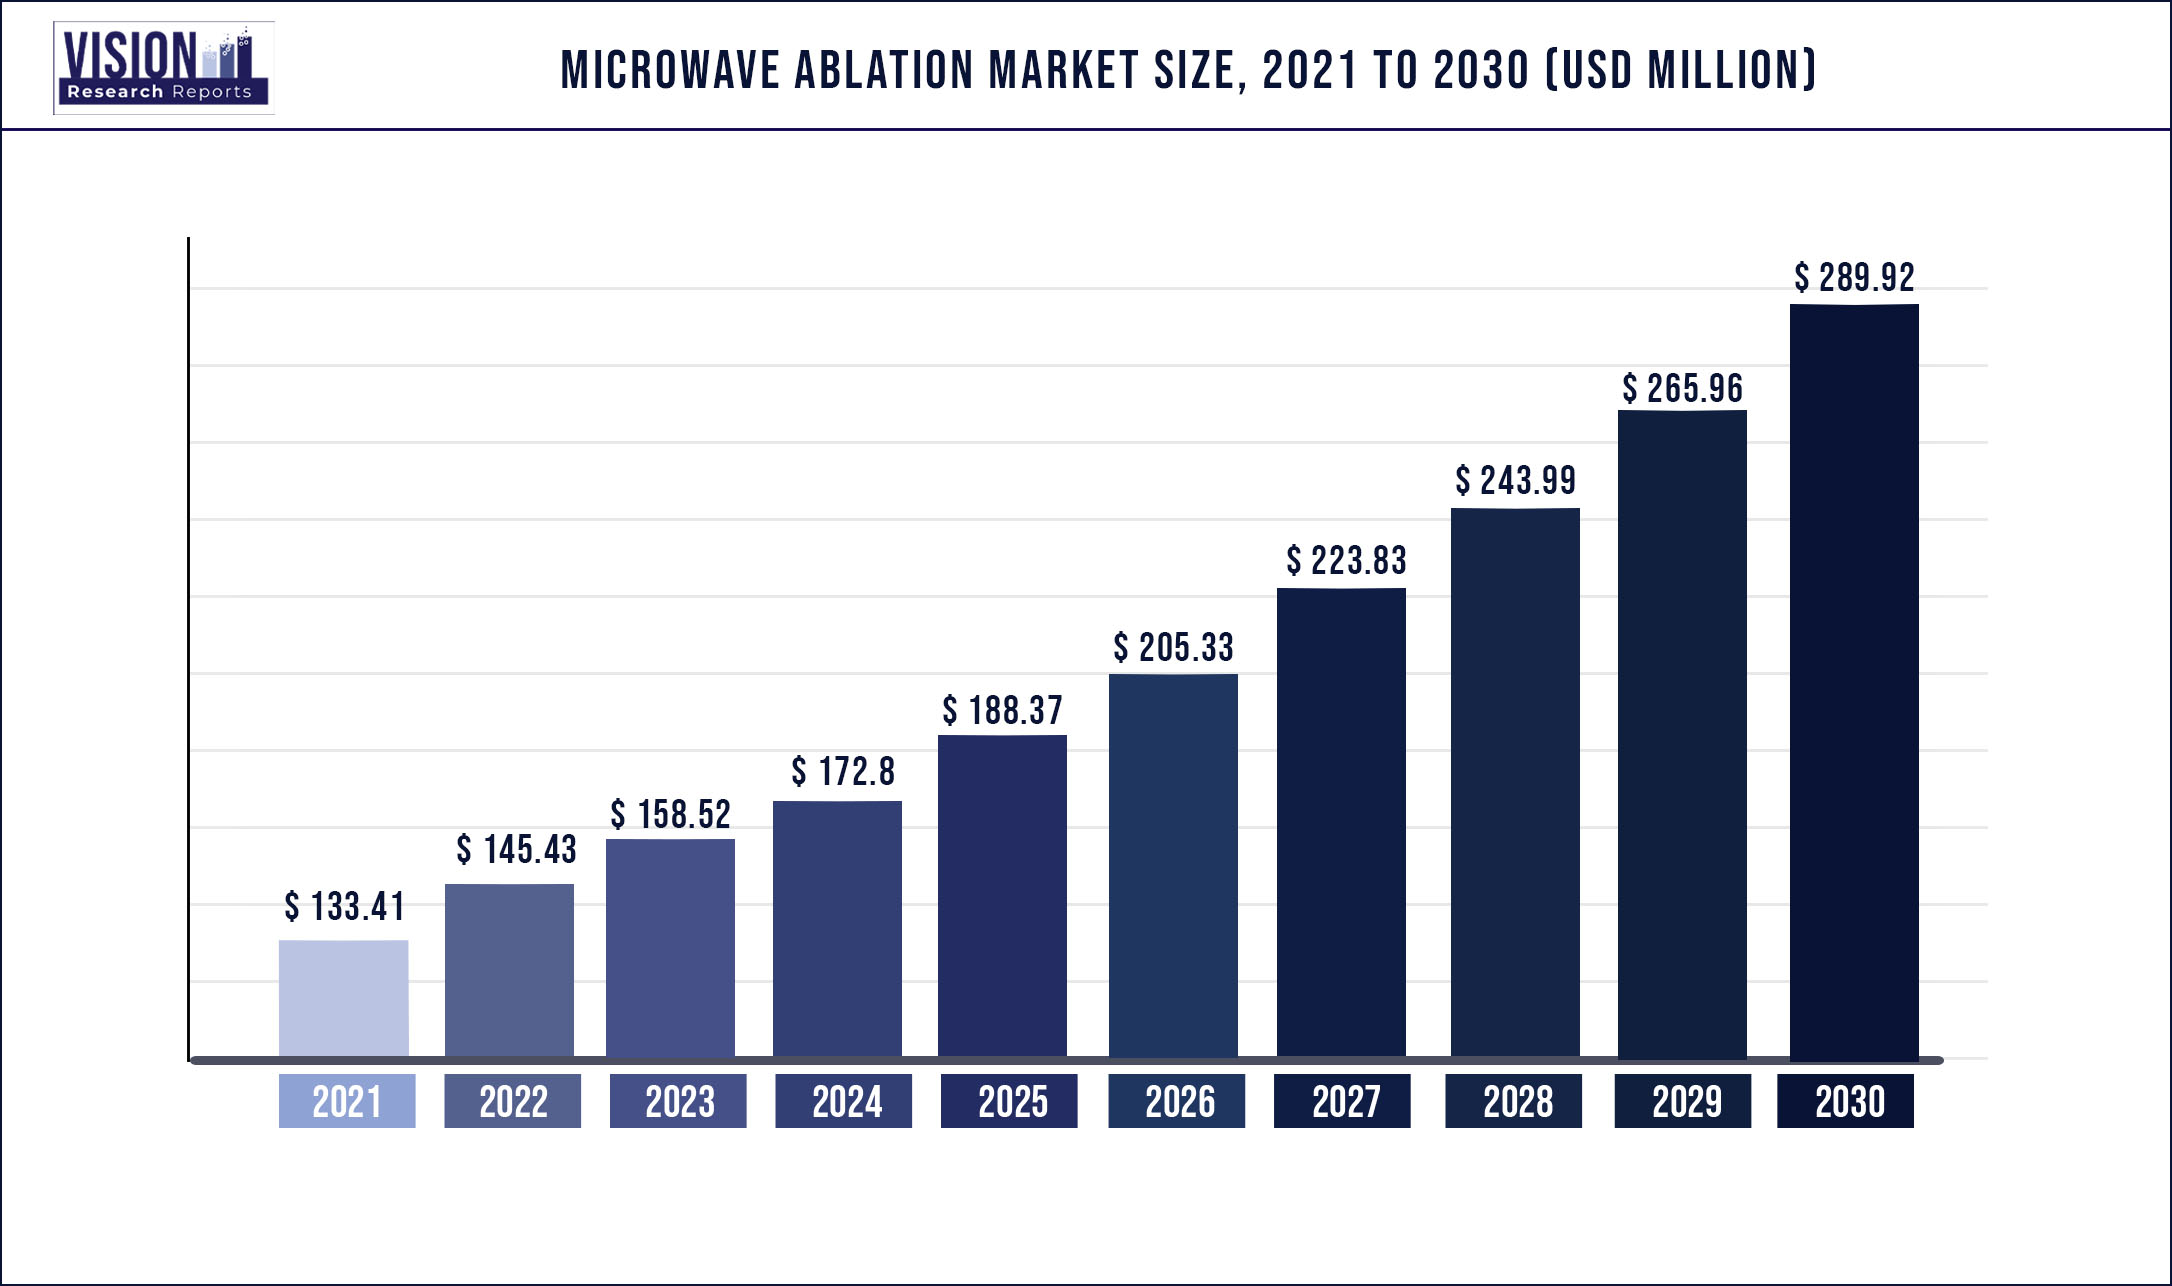 Microwave Ablation Market Size 2021 to 2030